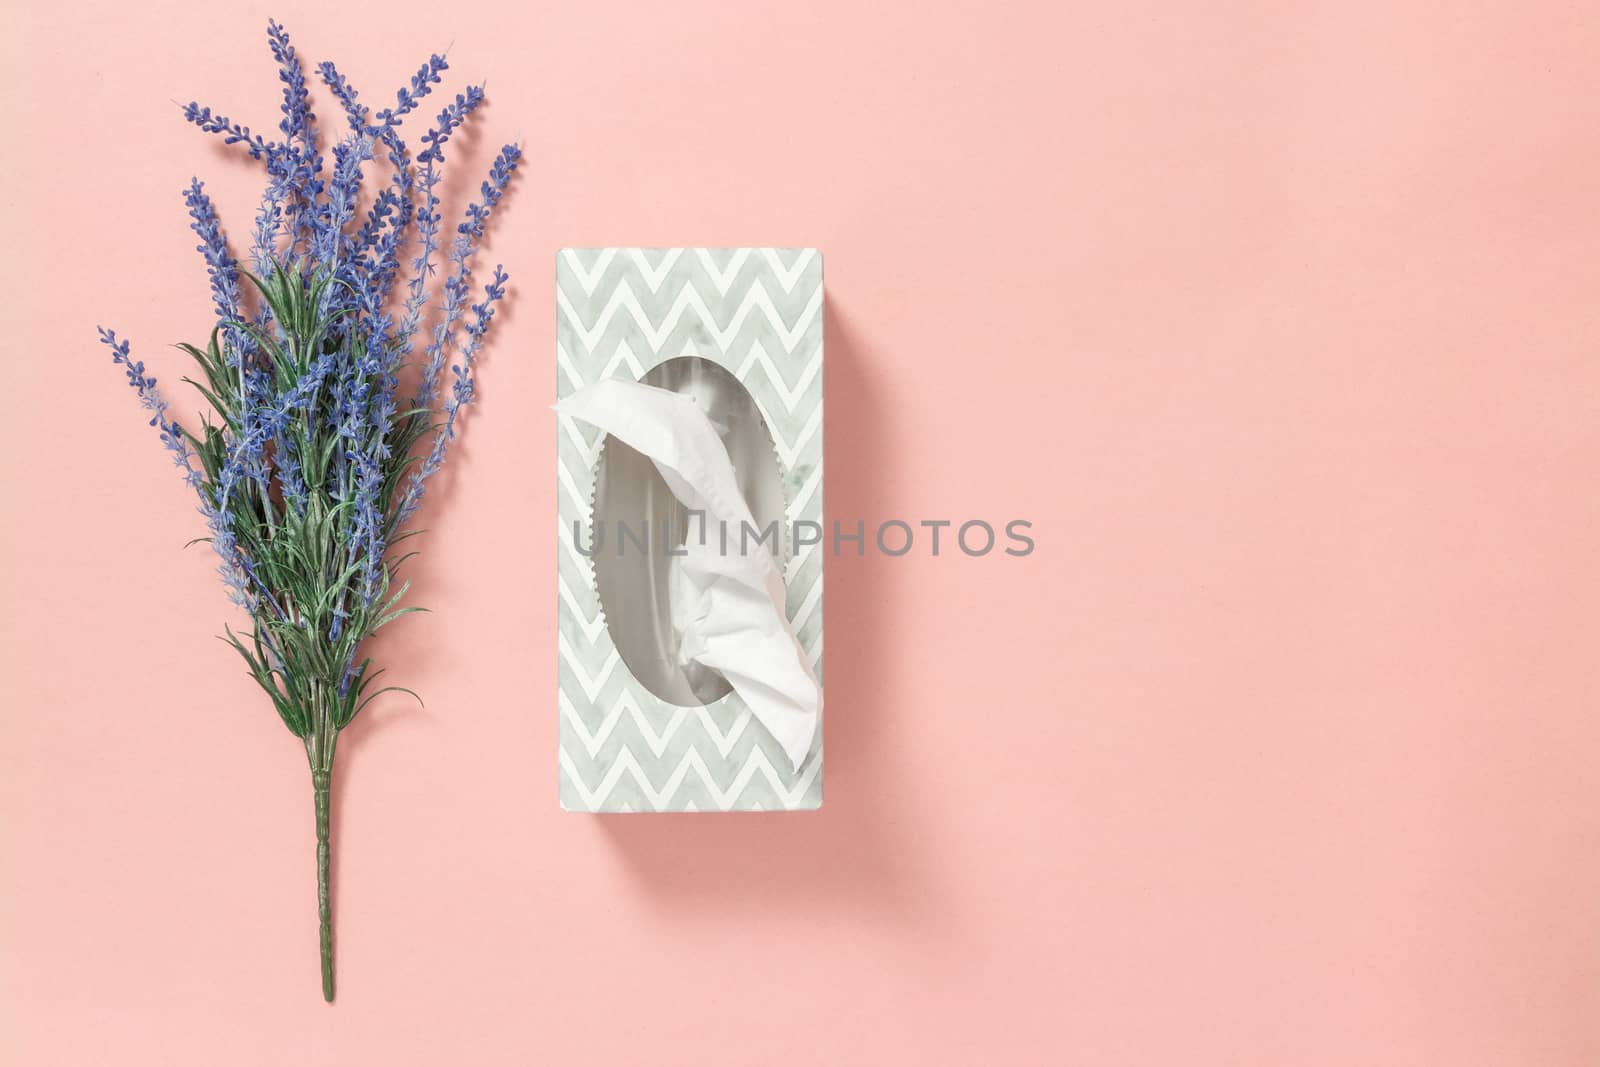 Tissue box and blue lavender on pink background by anikasalsera